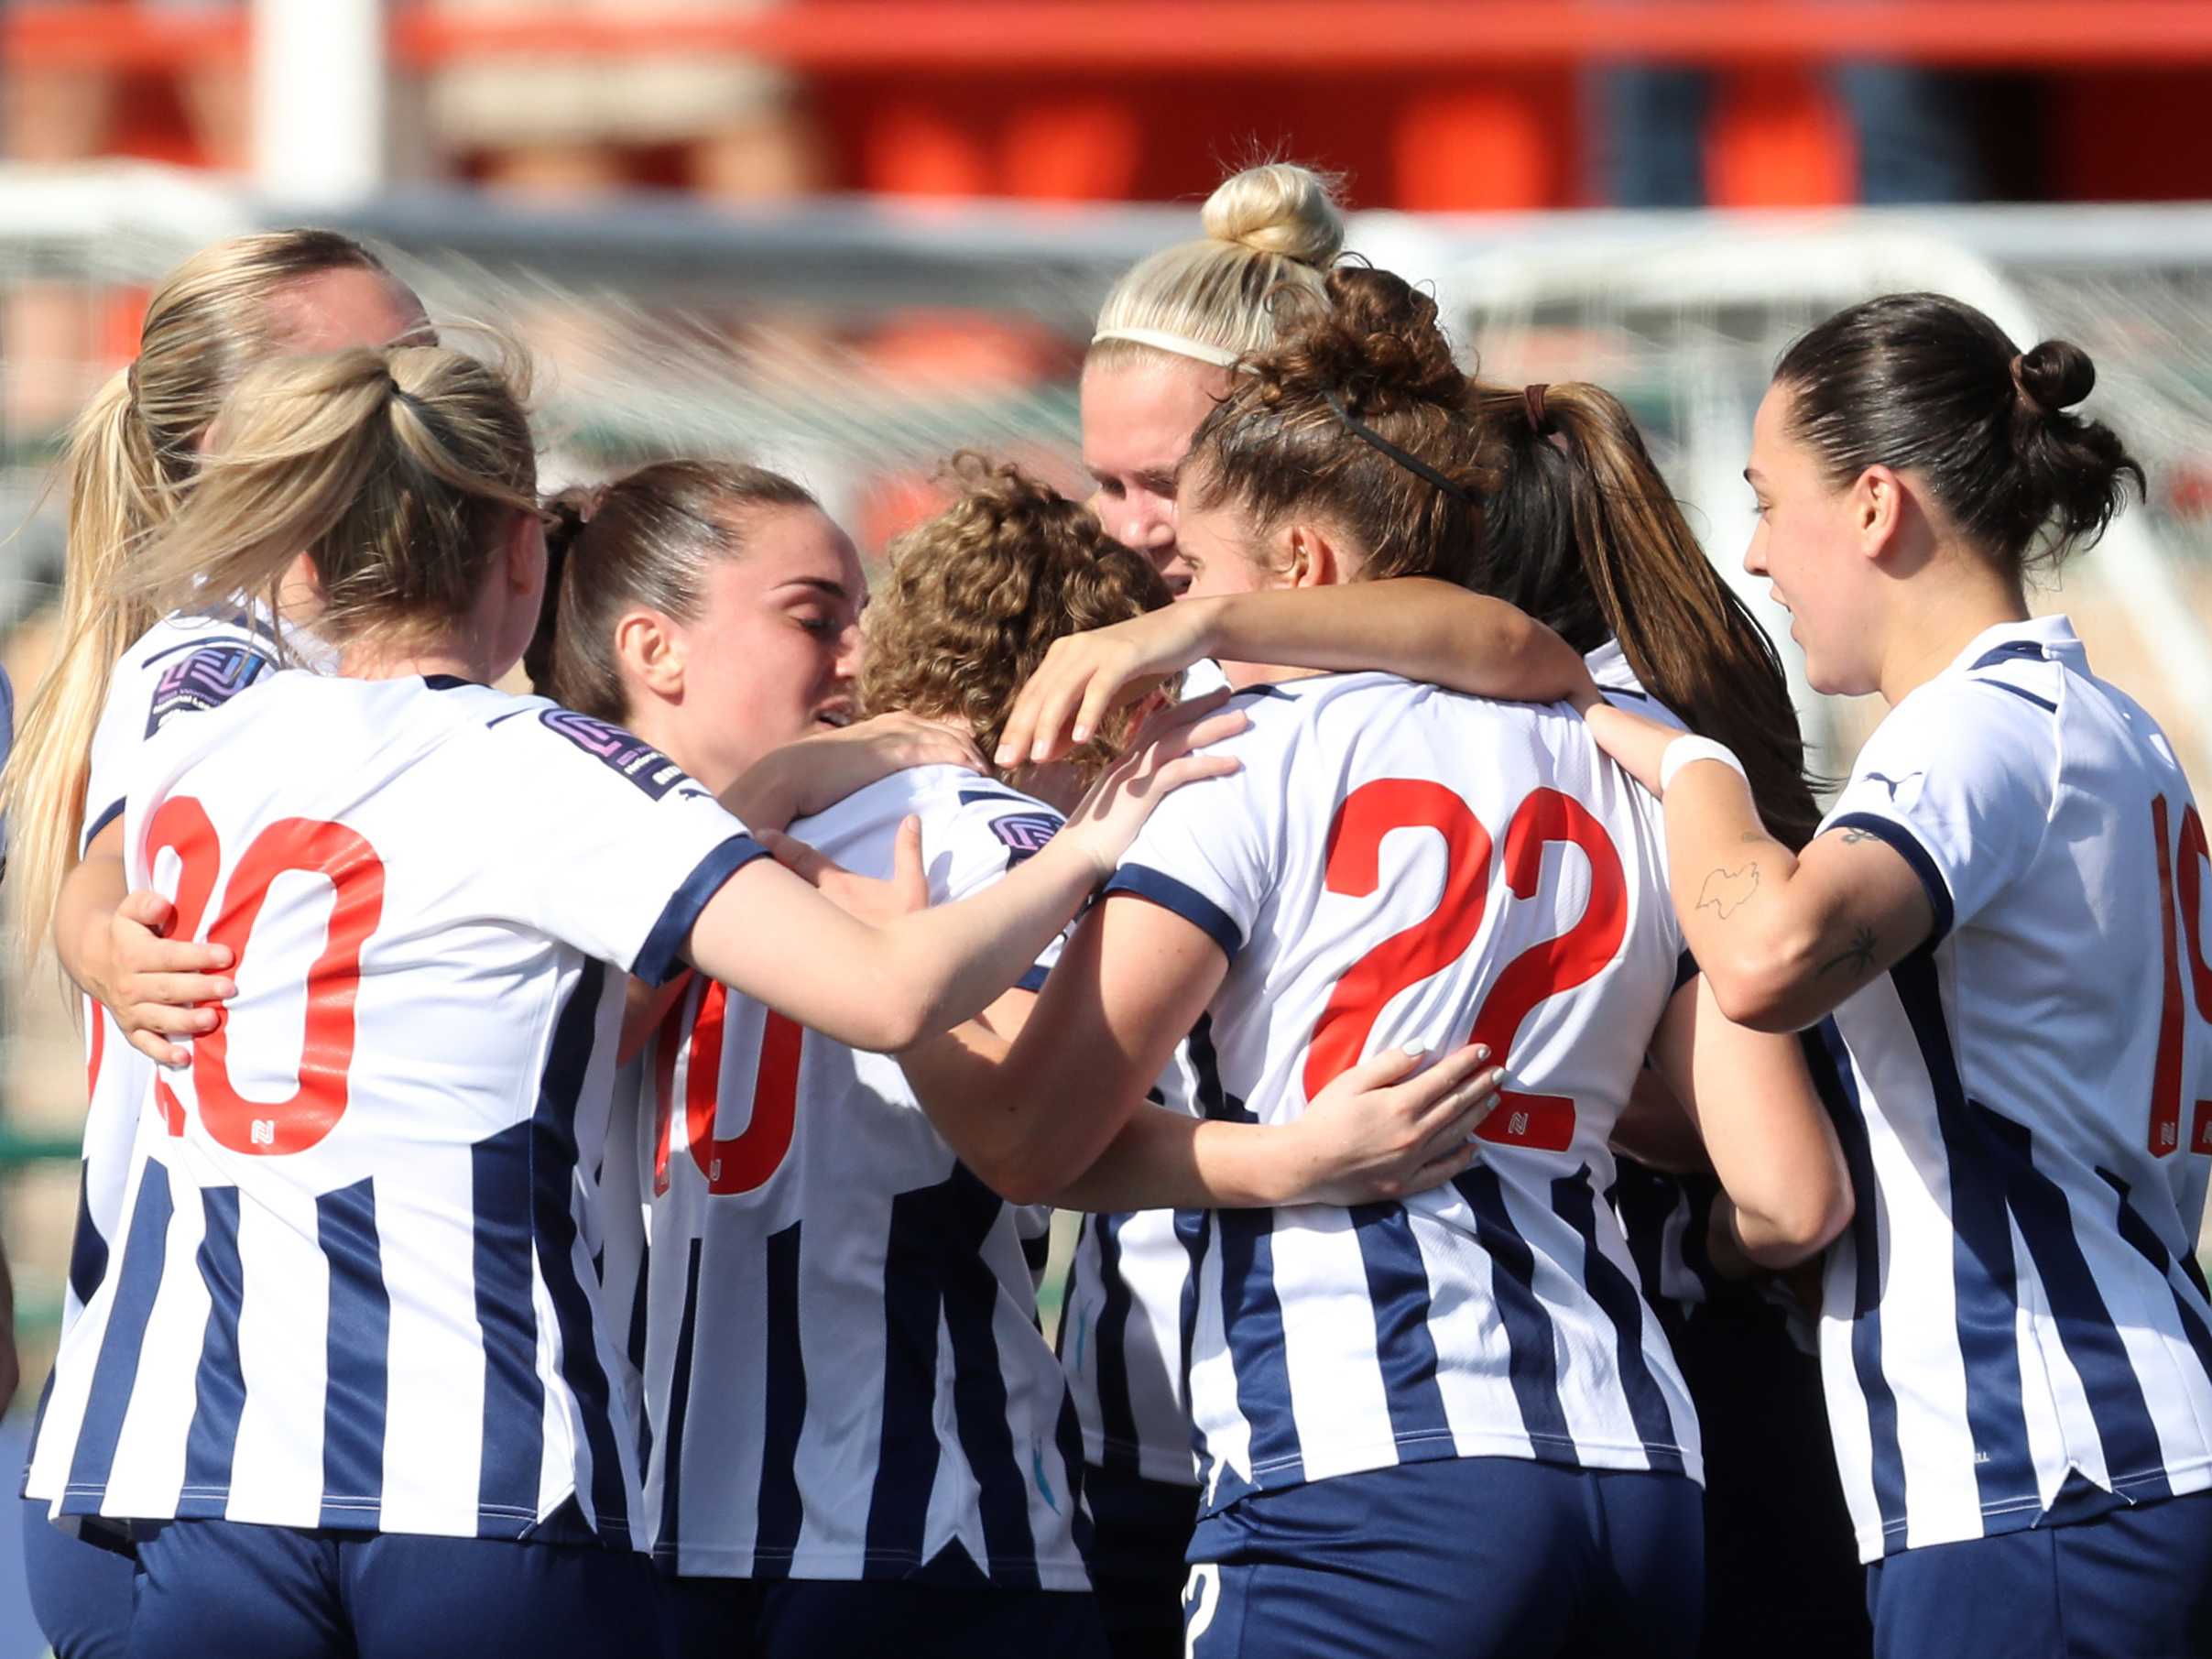 An image of the Albion Women team celebrating a goal